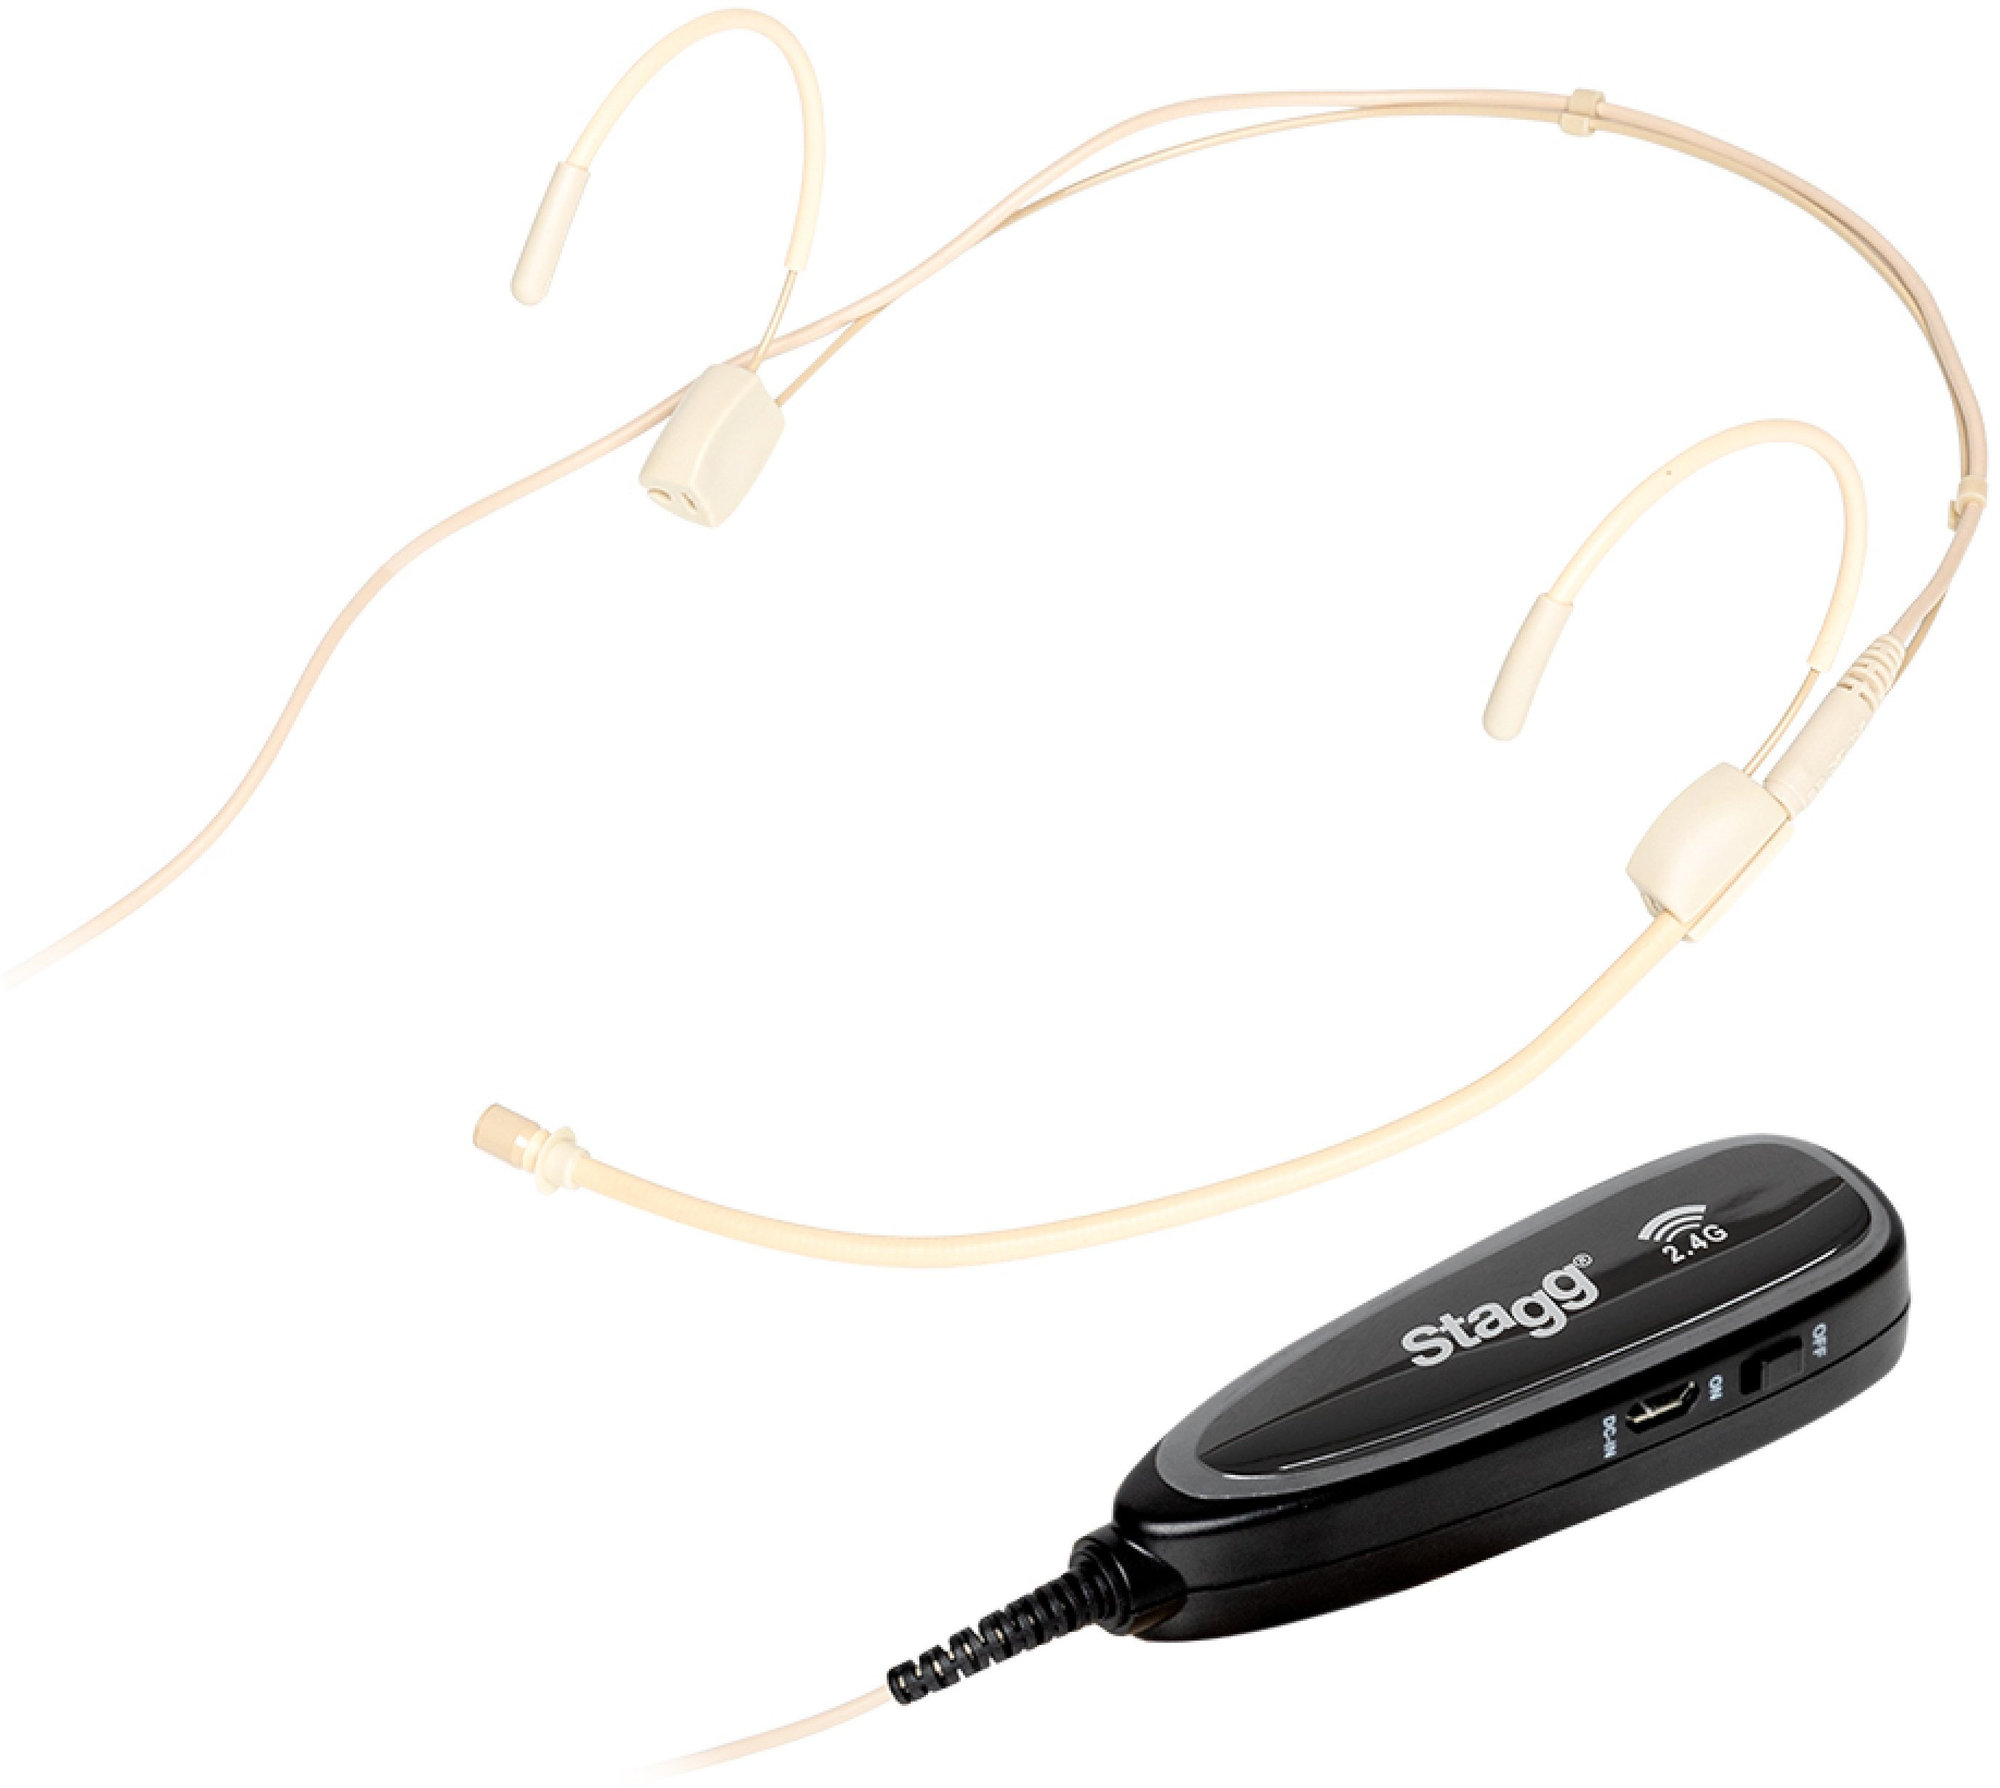 Stagg SUW 12H-BE UHF Beige Wireless Headset (2.4 GHz) Auriculares inalámbricos con micrófono